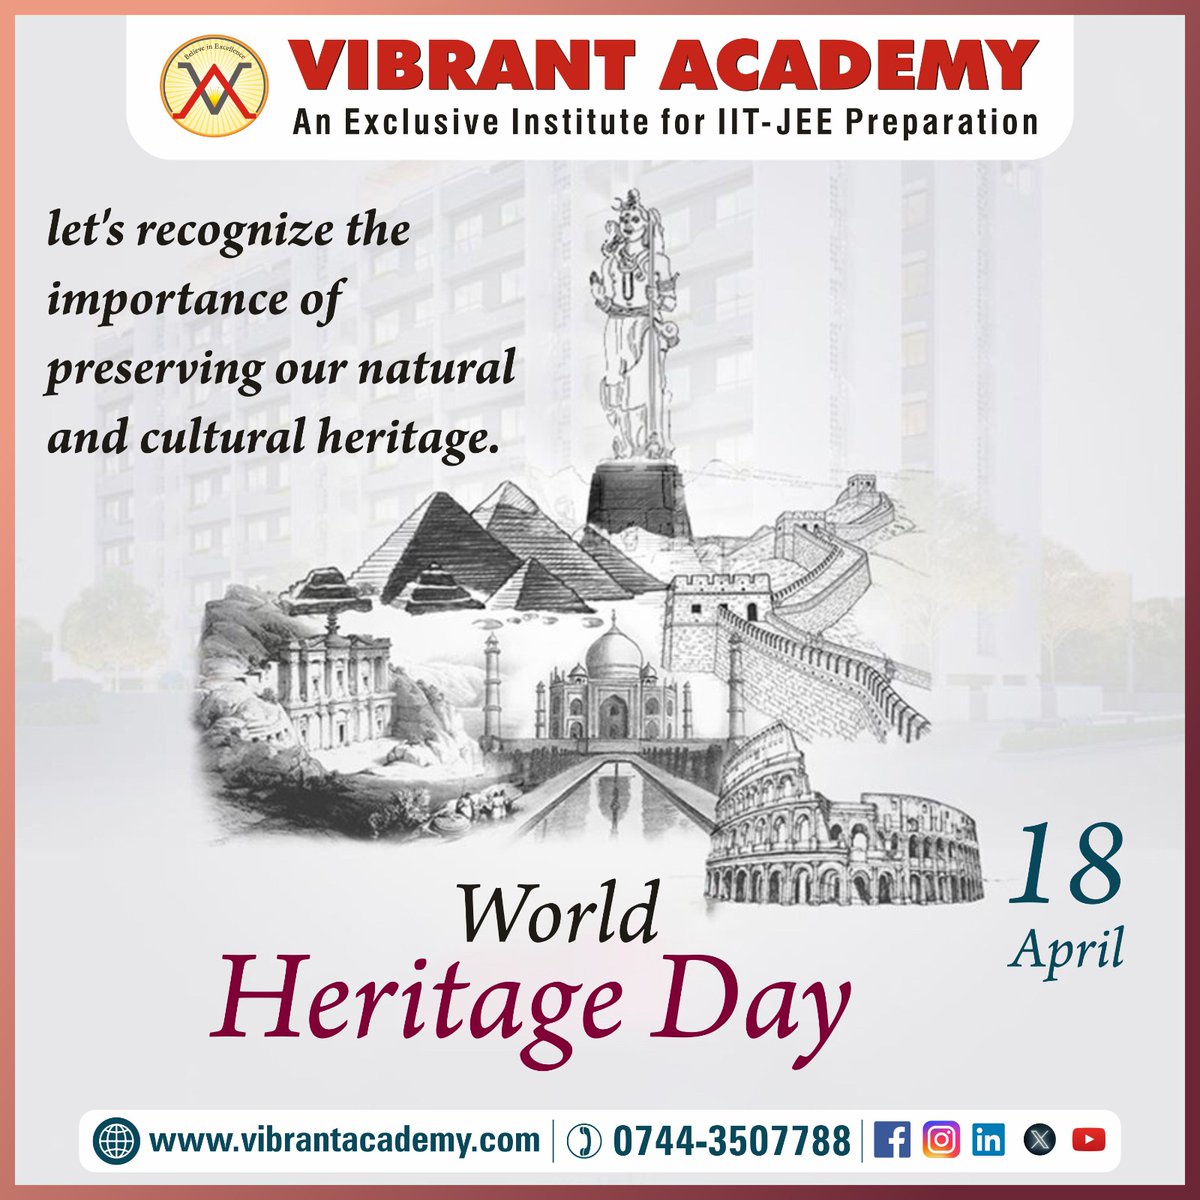 Happy 𝐖𝐨𝐫𝐥𝐝 𝐇𝐞𝐫𝐢𝐭𝐚𝐠𝐞 𝐃𝐚𝐲..!! 
Let's celebrate and protect our rich cultural heritage for generations to come.

#WorldHeritageDay #vibrantacademy #kota #kotacoaching #iit #jee #jeemains #JEEADVANCED #iitjeepreparation #jeemains2024 #jeeadvanced2024